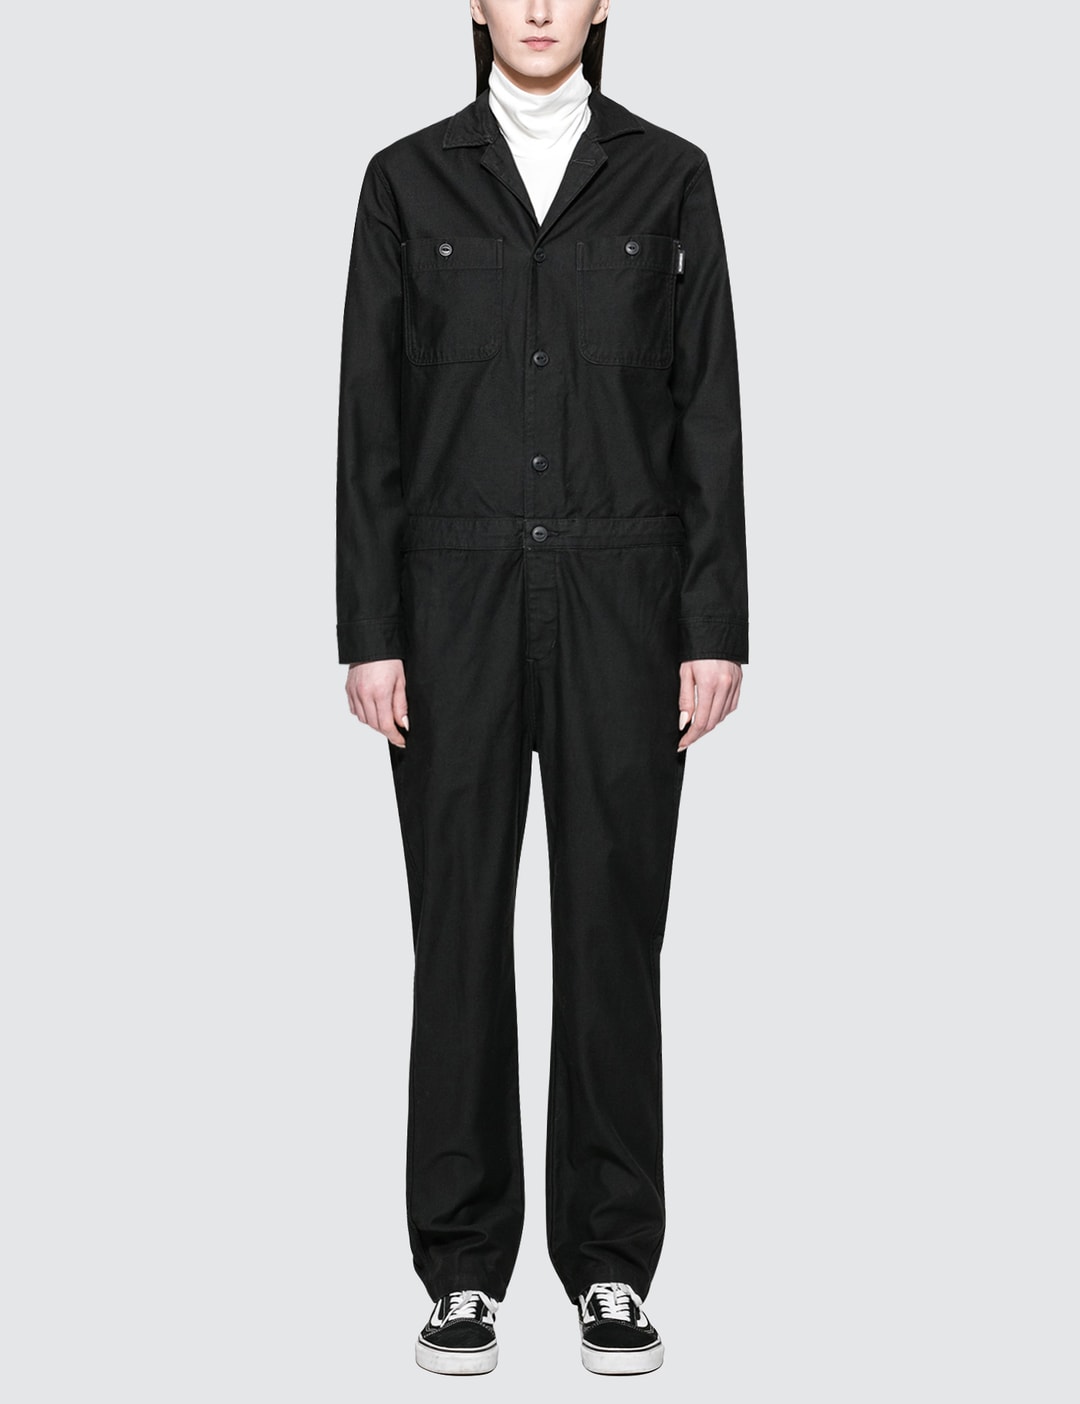 Carhartt Work In Progress - Cass Coverall | HBX - Globally Curated ...